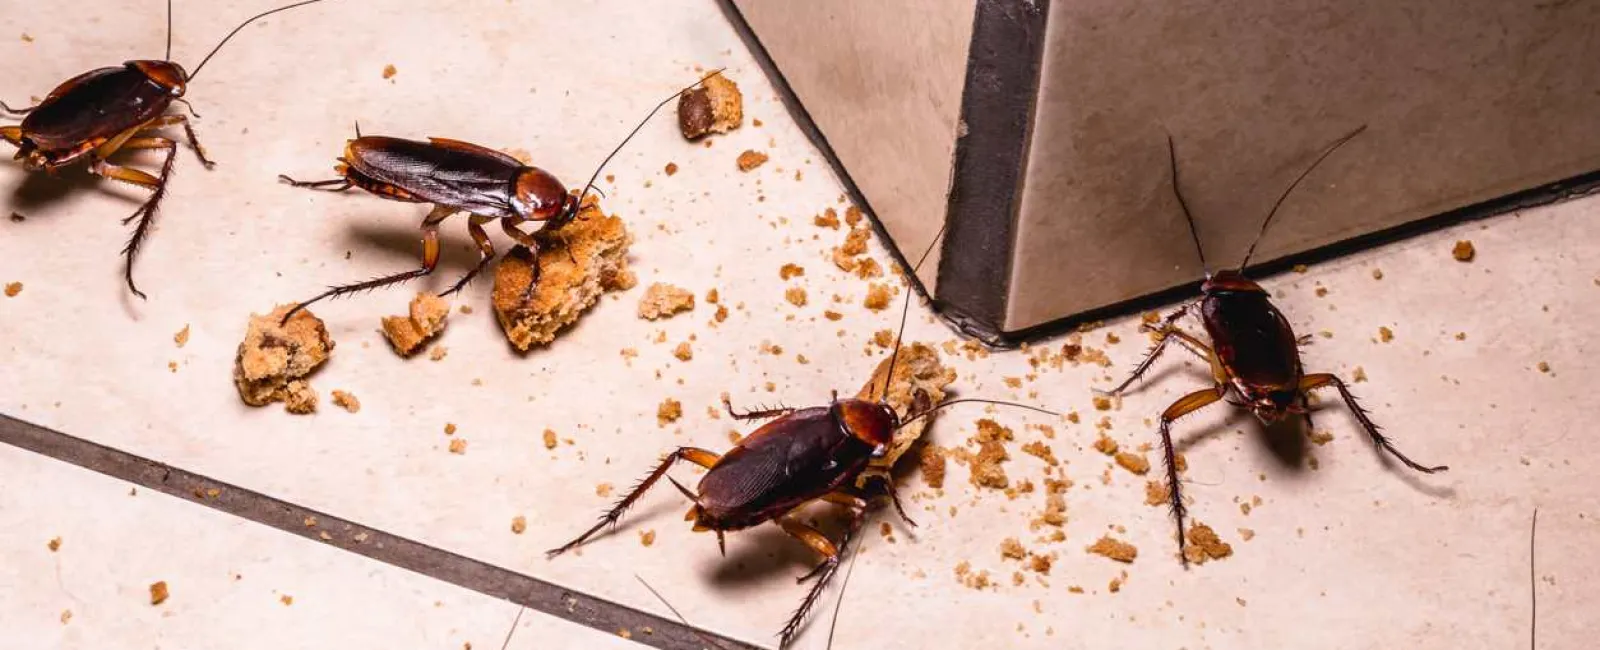 a group of cockroaches eating cookies of the floor